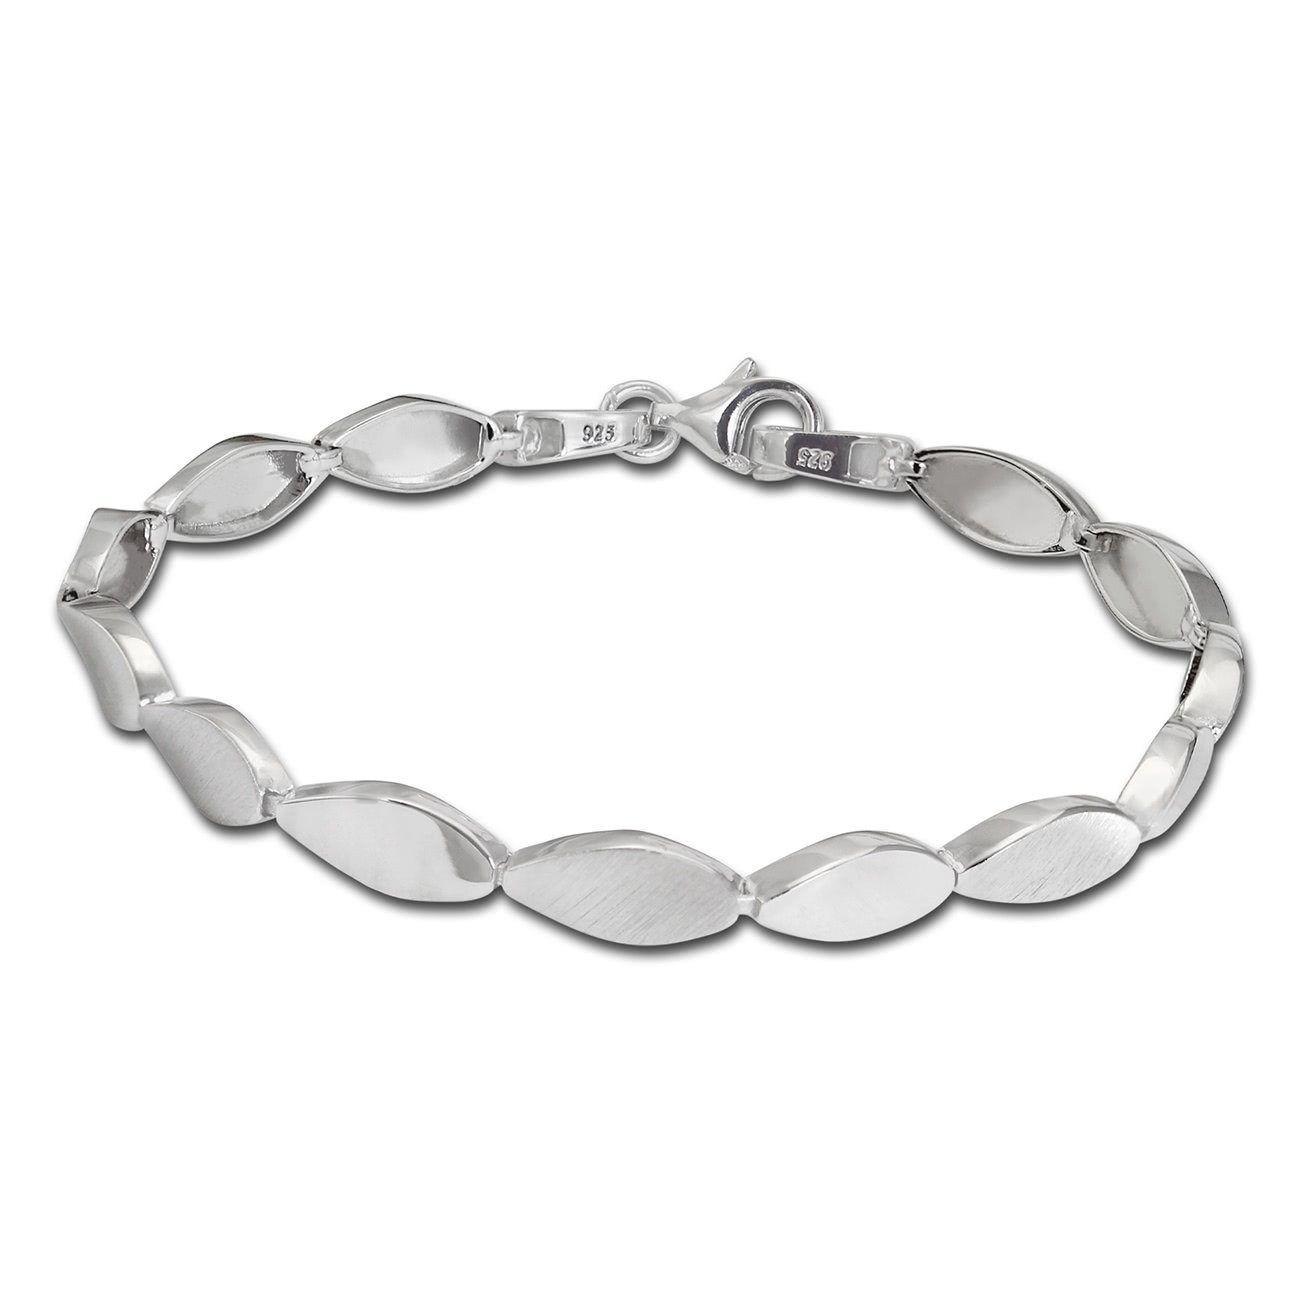 SilberDream Silberarmband »SilberDream Armband Tropfen 925 Silber« (Armband),  Damen Armband (Tropfen) ca. 19cm, 925 Sterling Silber, Farbe: silber